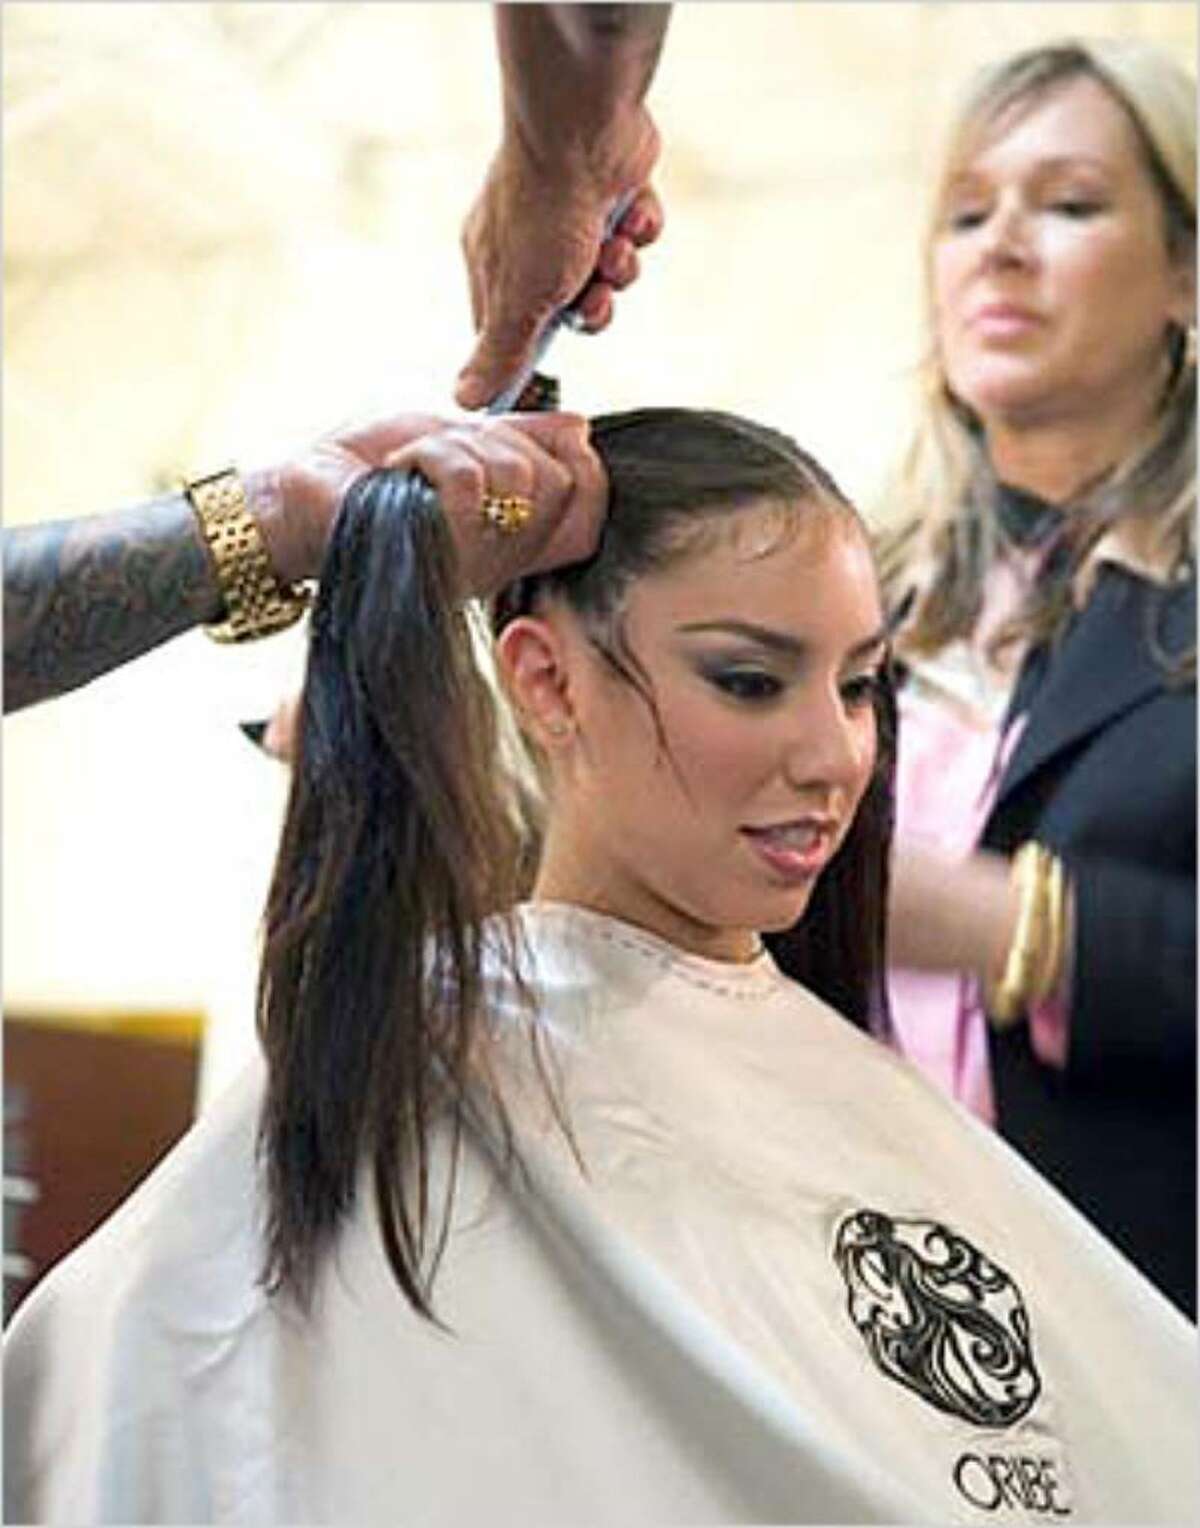 Oribe creates pigtails for the Frida Kahlo look.